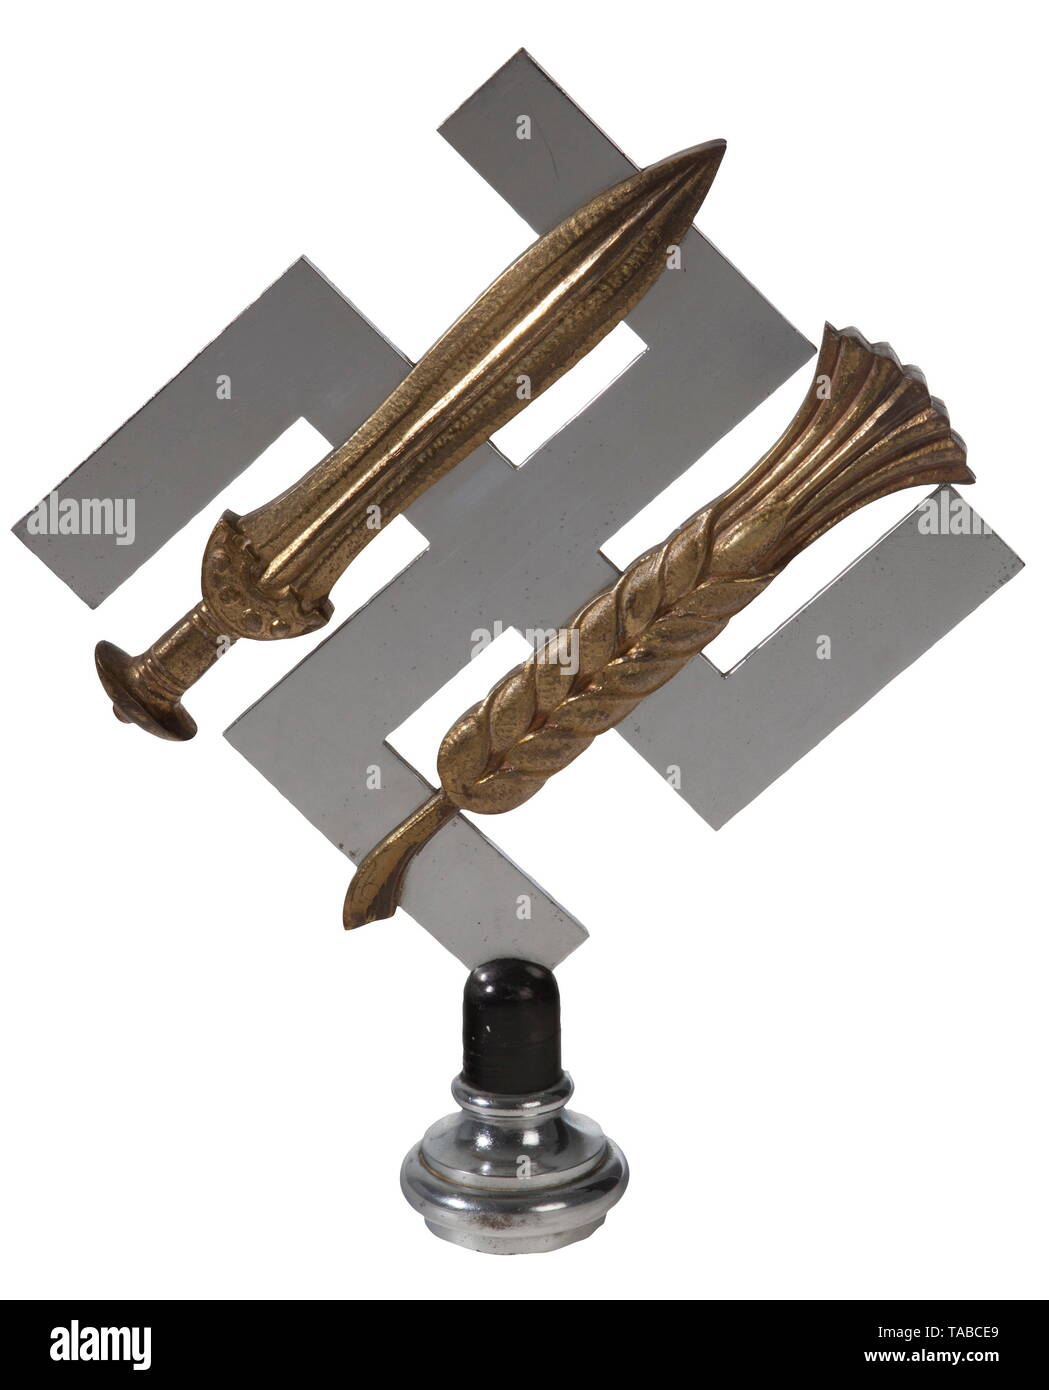 A Reichsnährstand pole top Nickel-plated swastika superimposed with gilded Germanic tribe sword and wheat sheaf. Edge of swastika's lower arm stamped, 'Ges. Gesch.', 'Priessen Rauer & Co München'. Without pole cup. Height 26 cm. USA-lot, see page 4. historic, historical, organisations, organizations, organization, organisation 20th century, Additional-Rights-Clearance-Info-Not-Available Stock Photo